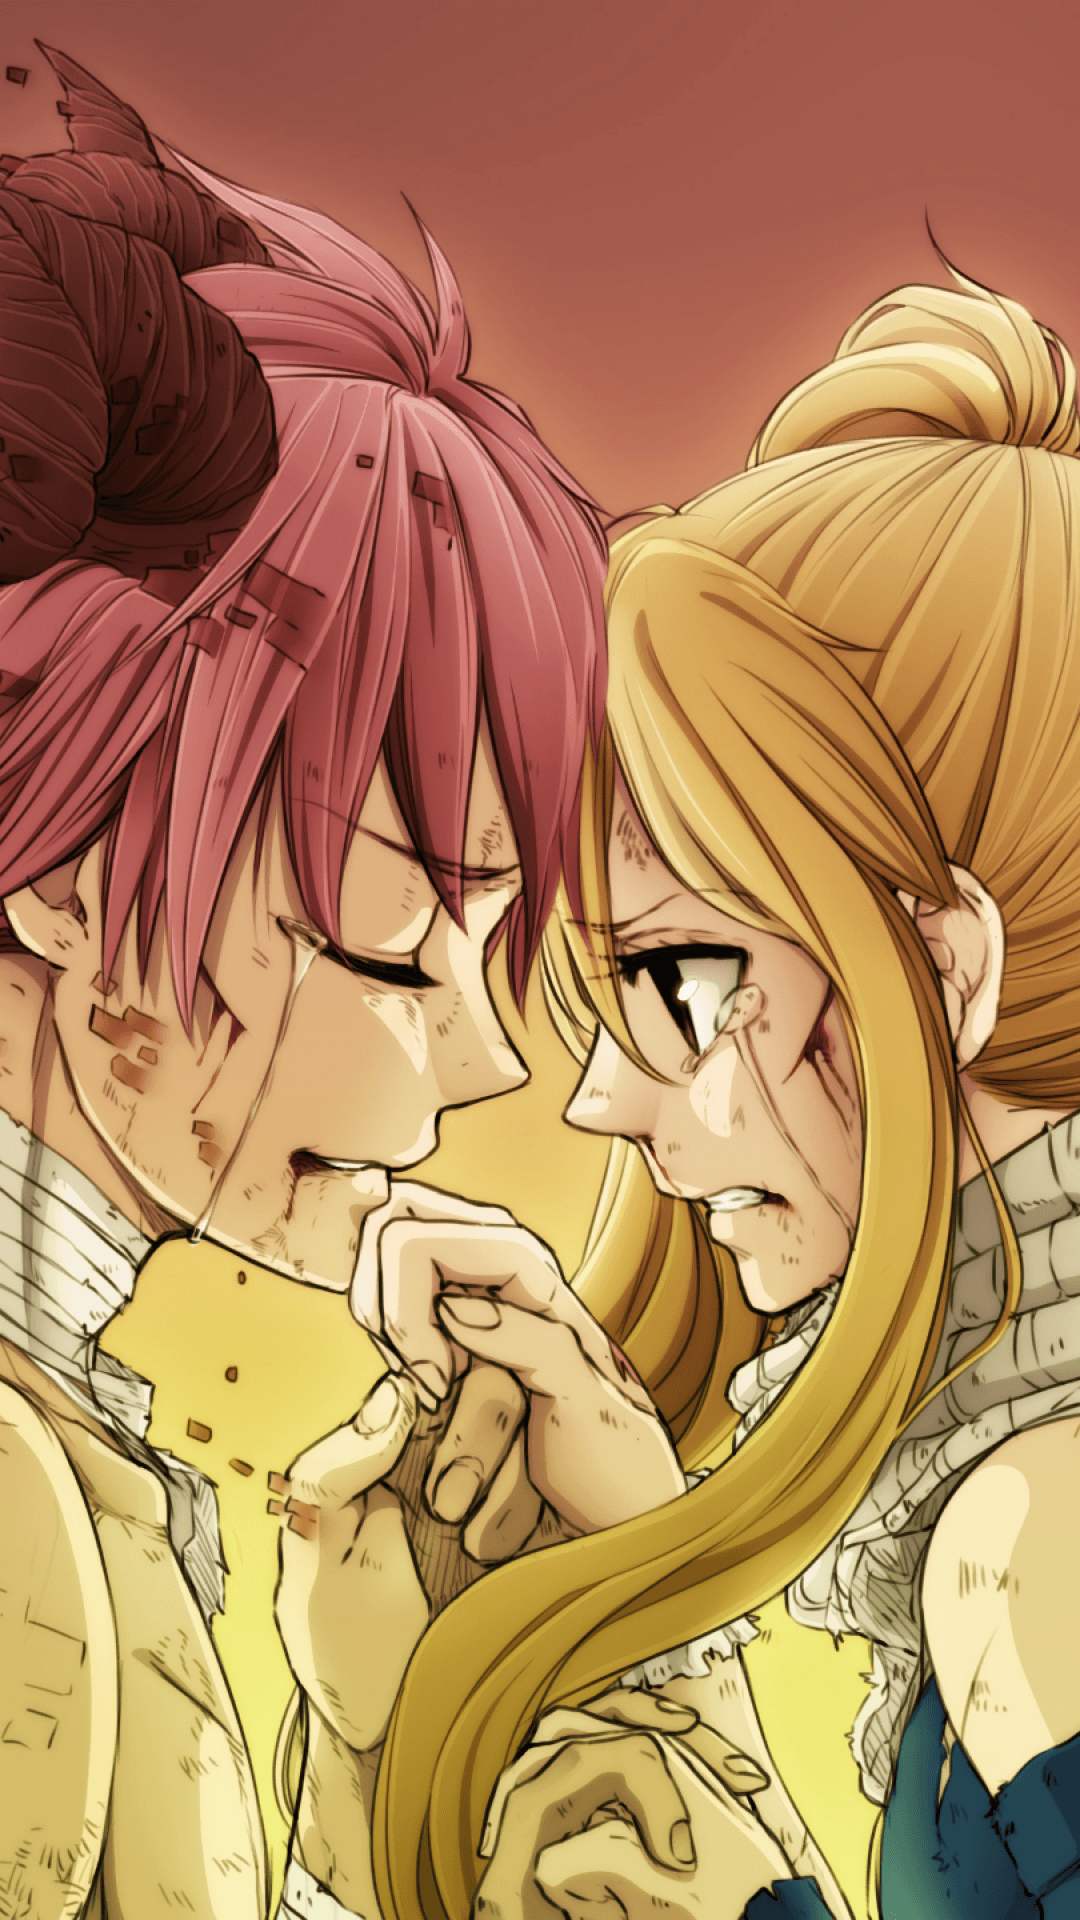 Fairy Tail Iphone Wallpapers Top Free Fairy Tail Iphone Backgrounds Wallpaperaccess